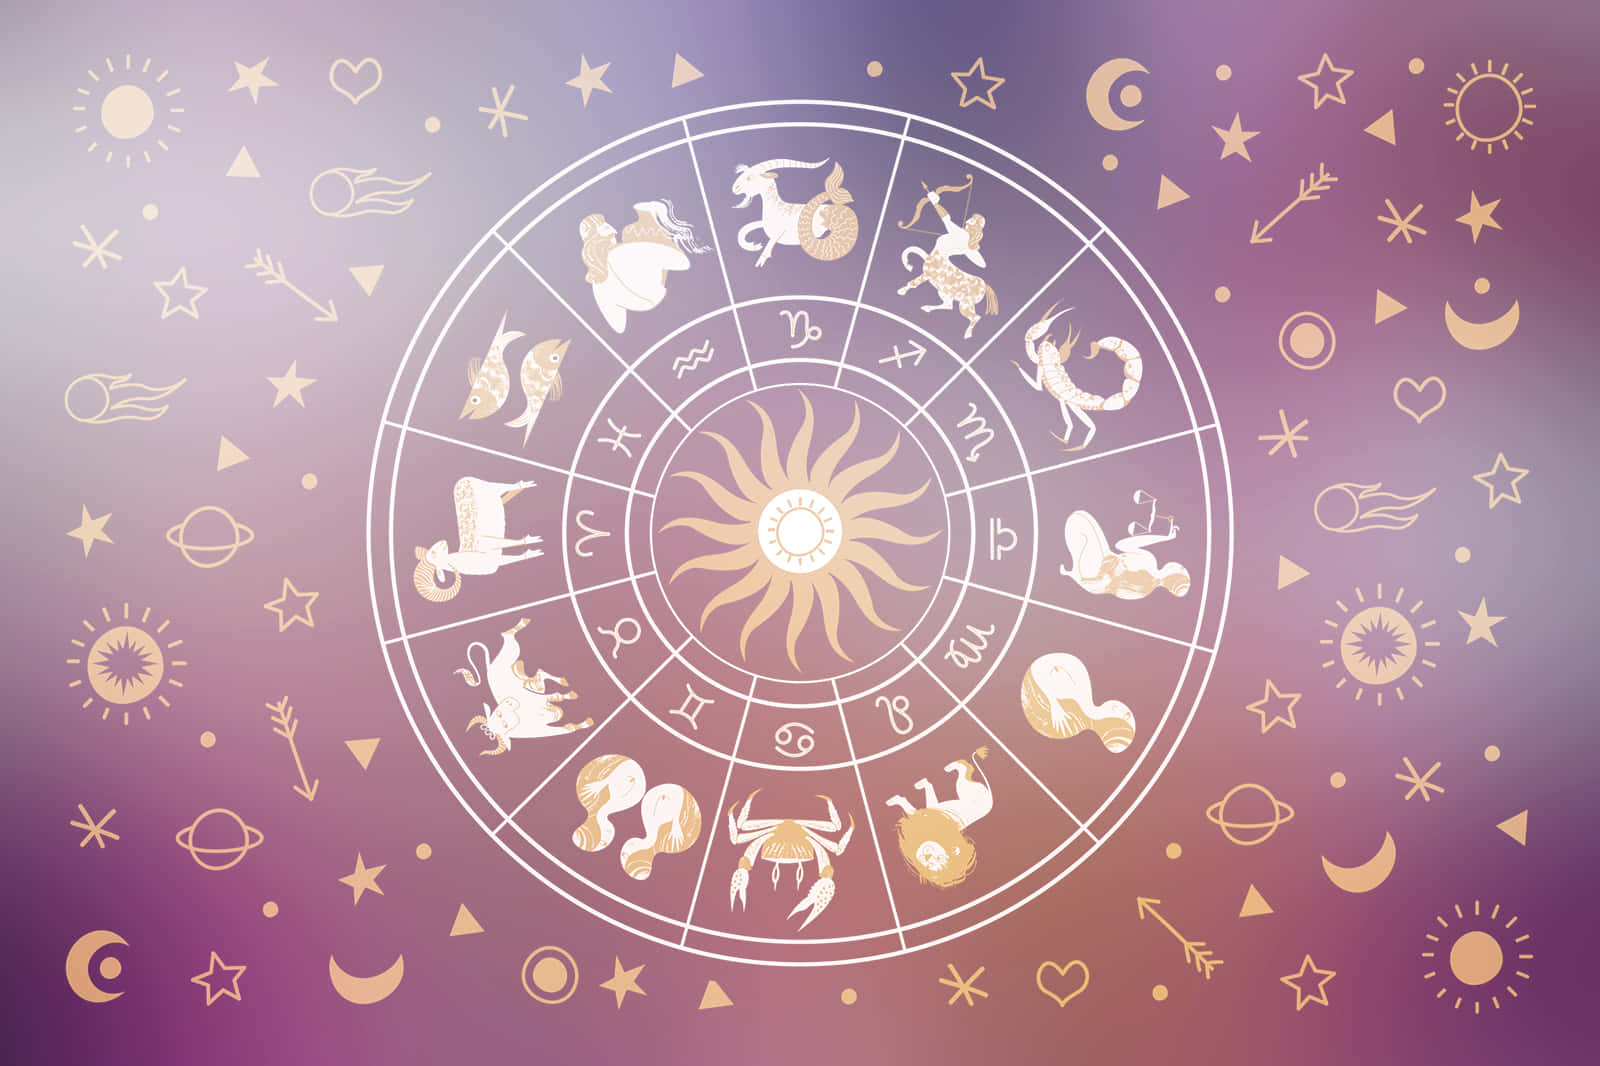 "Welcome to the Signs of the Zodiac"